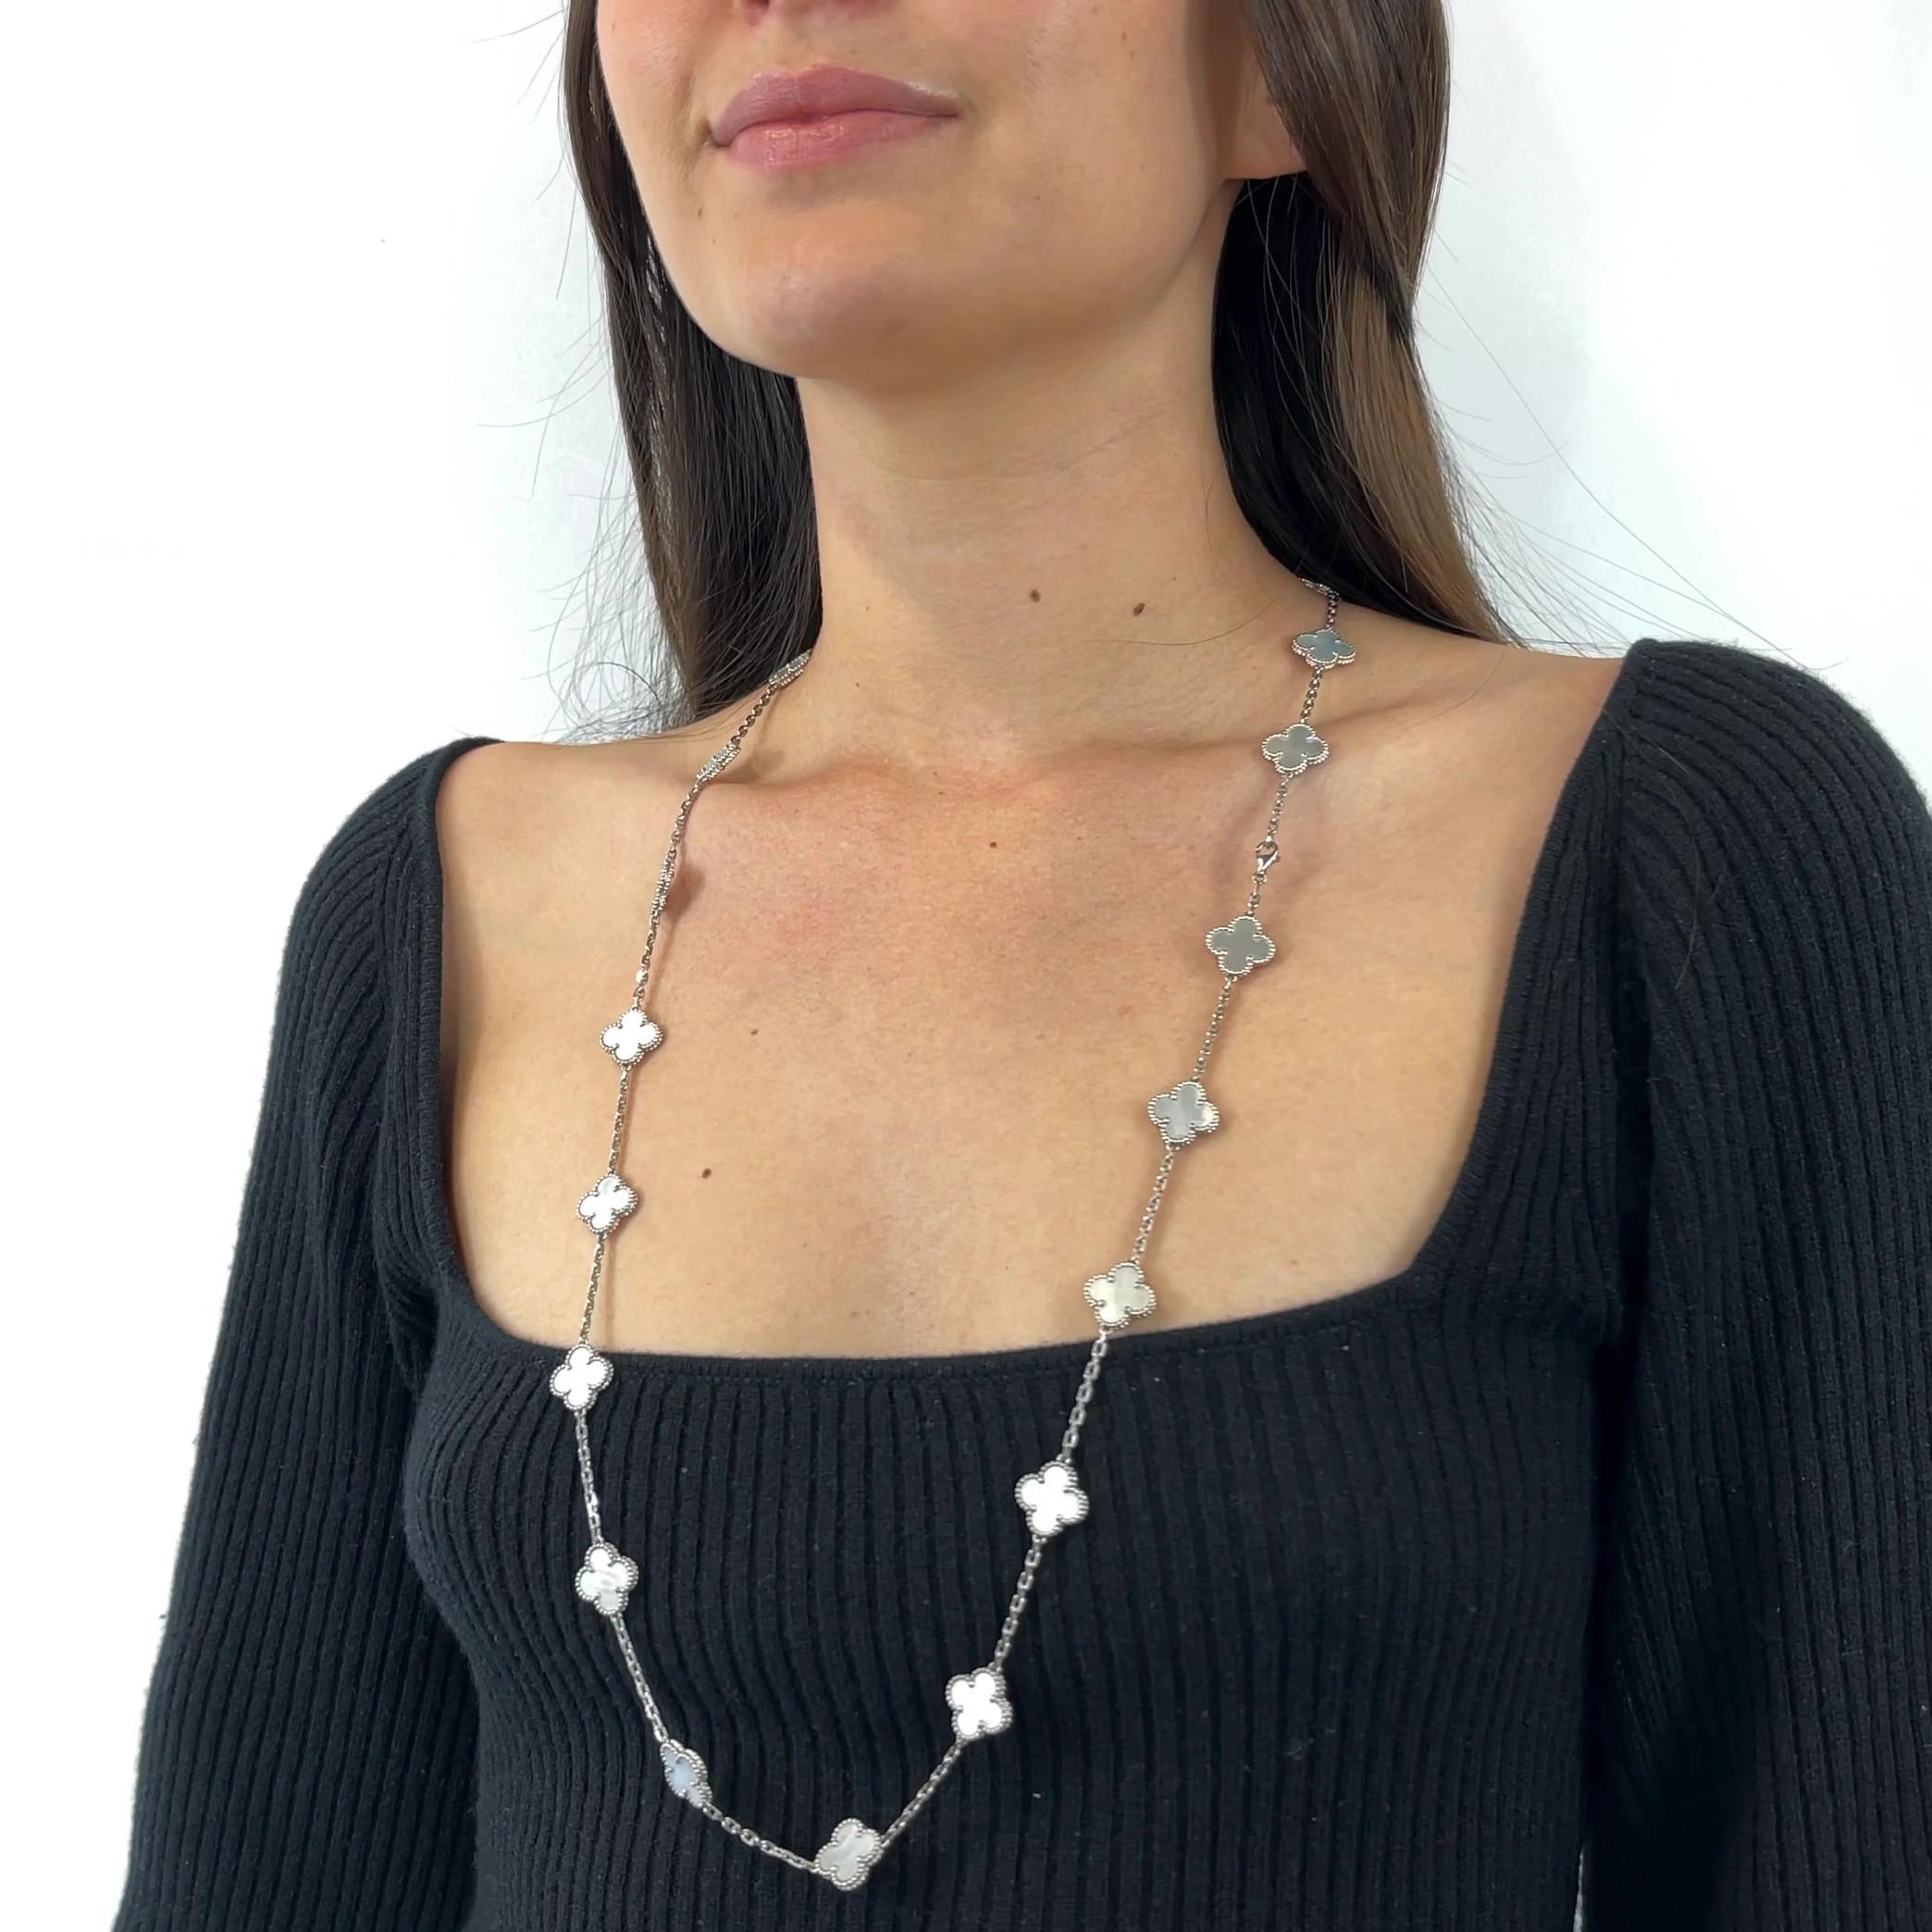 One Vintage VCA 33 Inch Mother of Pearl 18 Karat White Gold Alhambra Necklace. Featuring numerous polished mother of pearl clovers. Crafted in 18 karat white gold, signed VCA, serial #JB304529. Circa 2010s. The necklace is 33 inches in length.